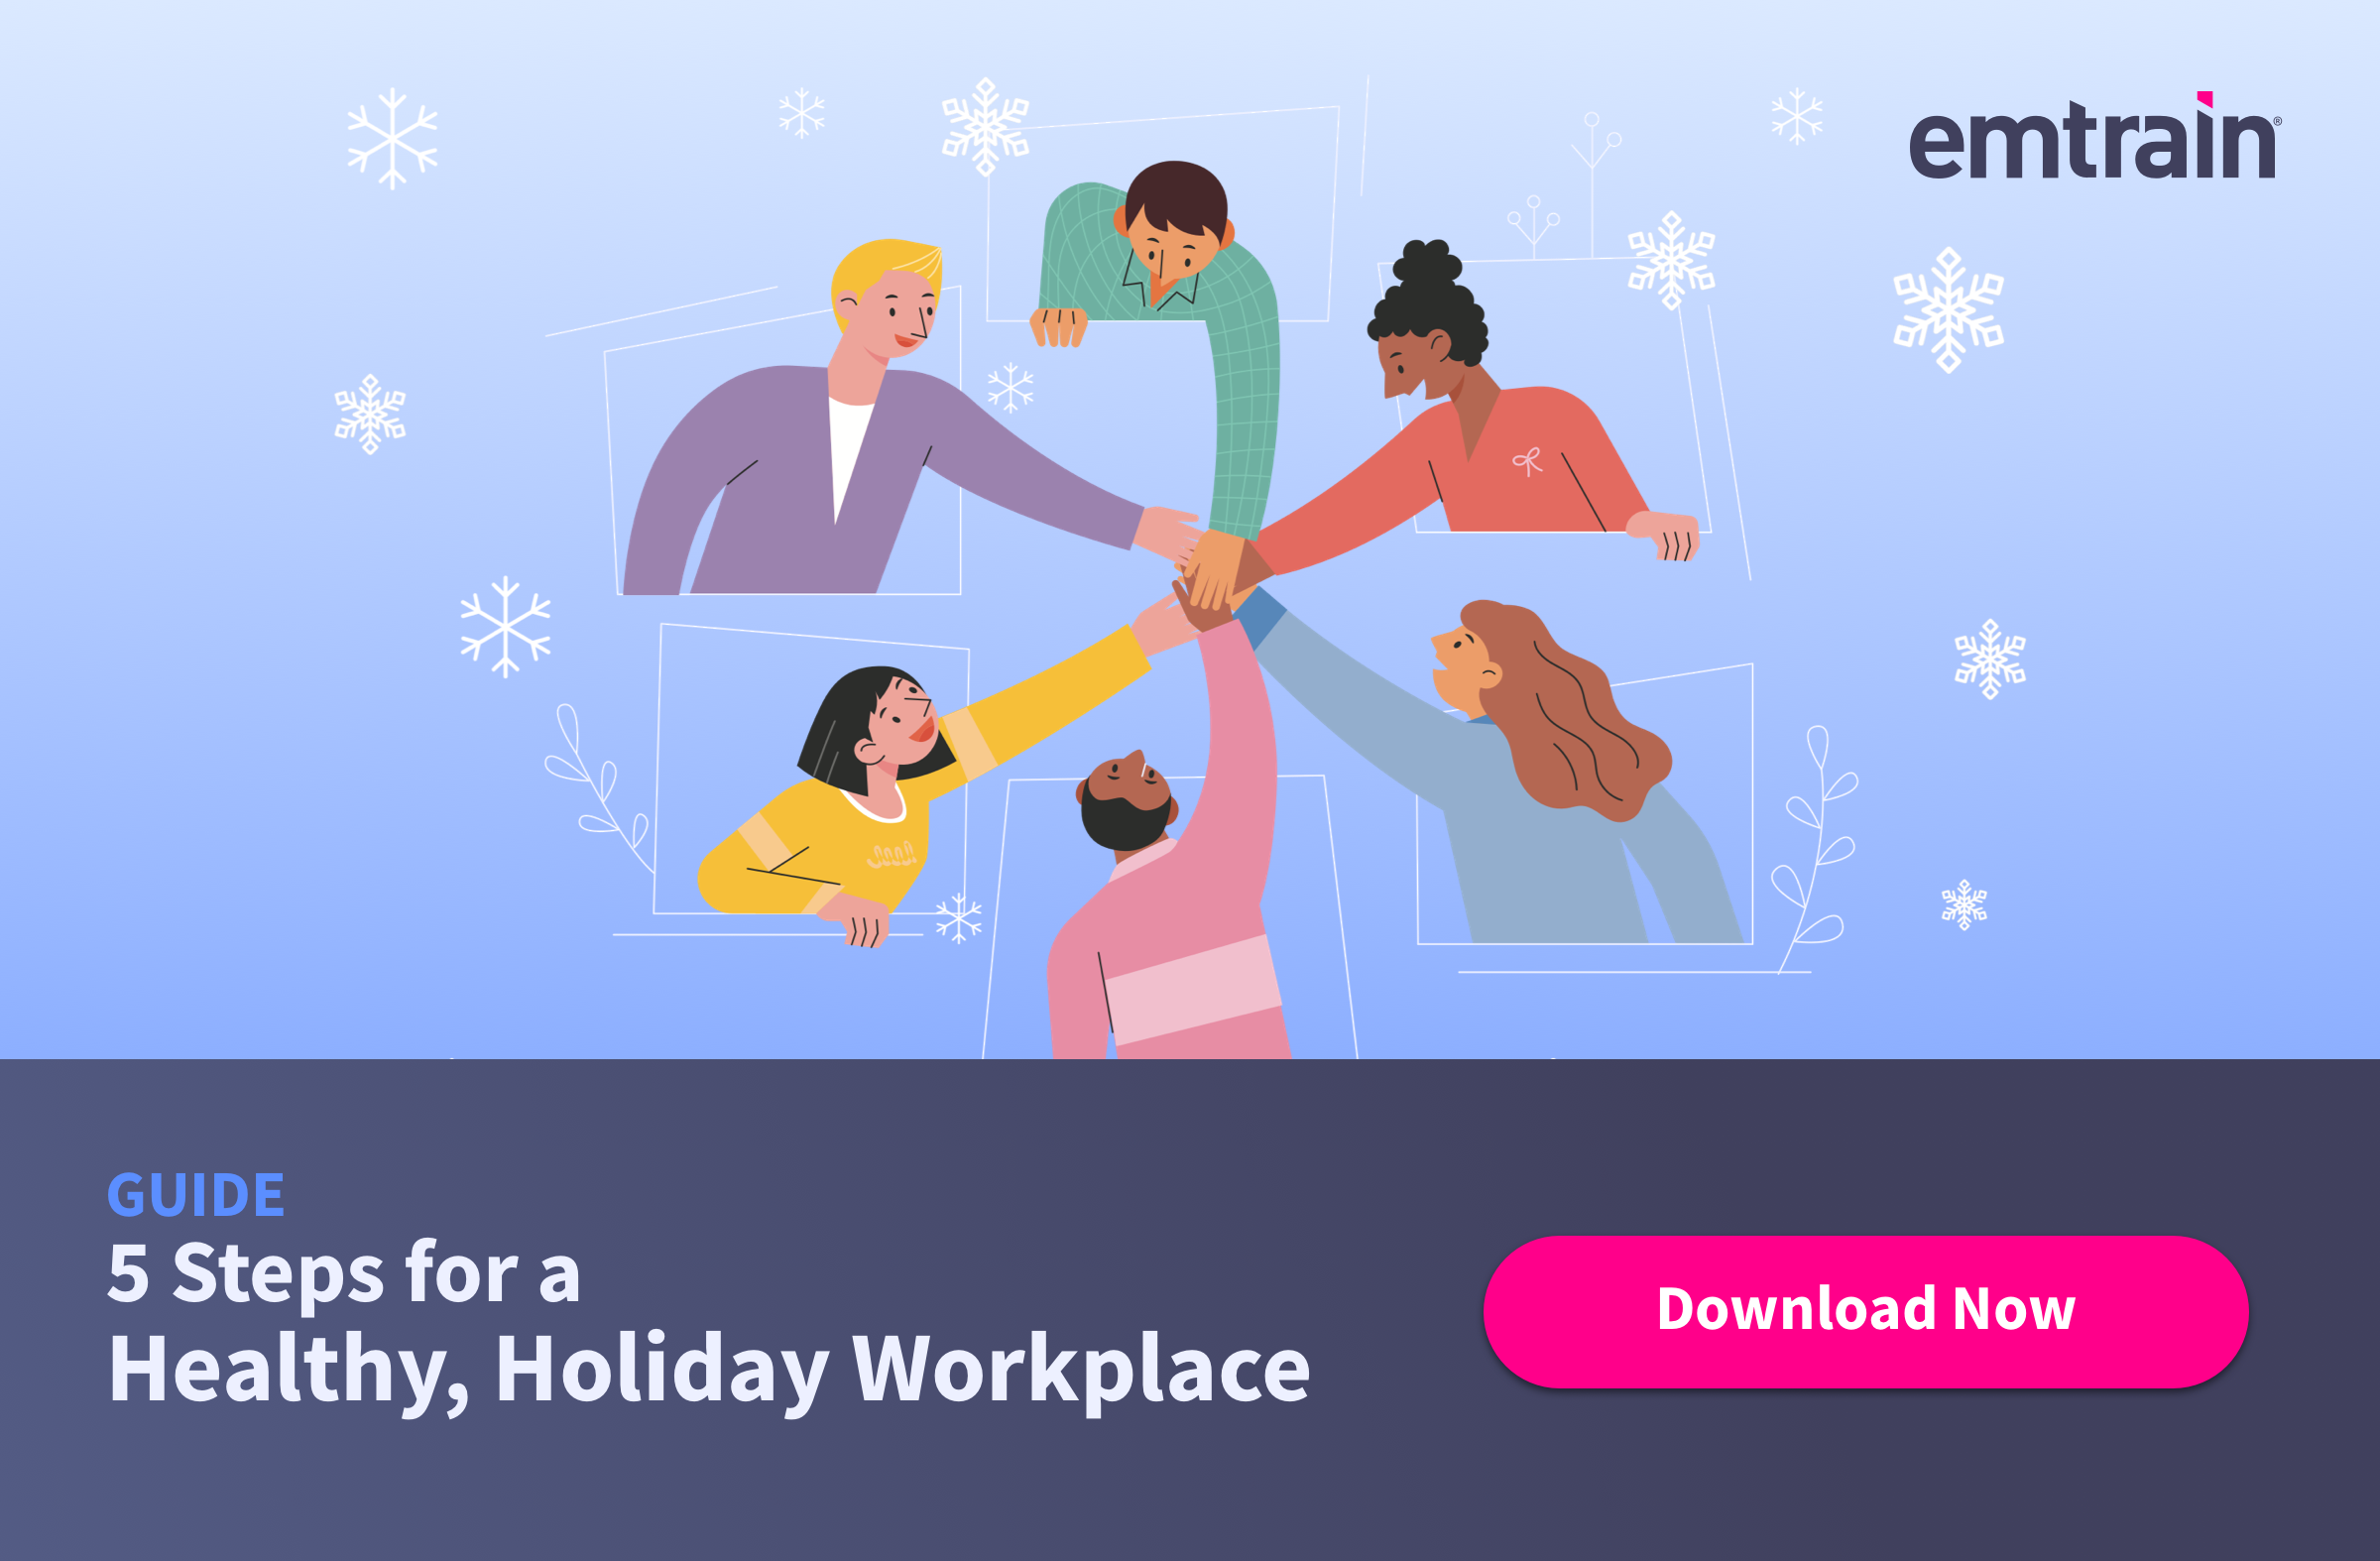 5 Steps for a Healthy, Holiday Workplace